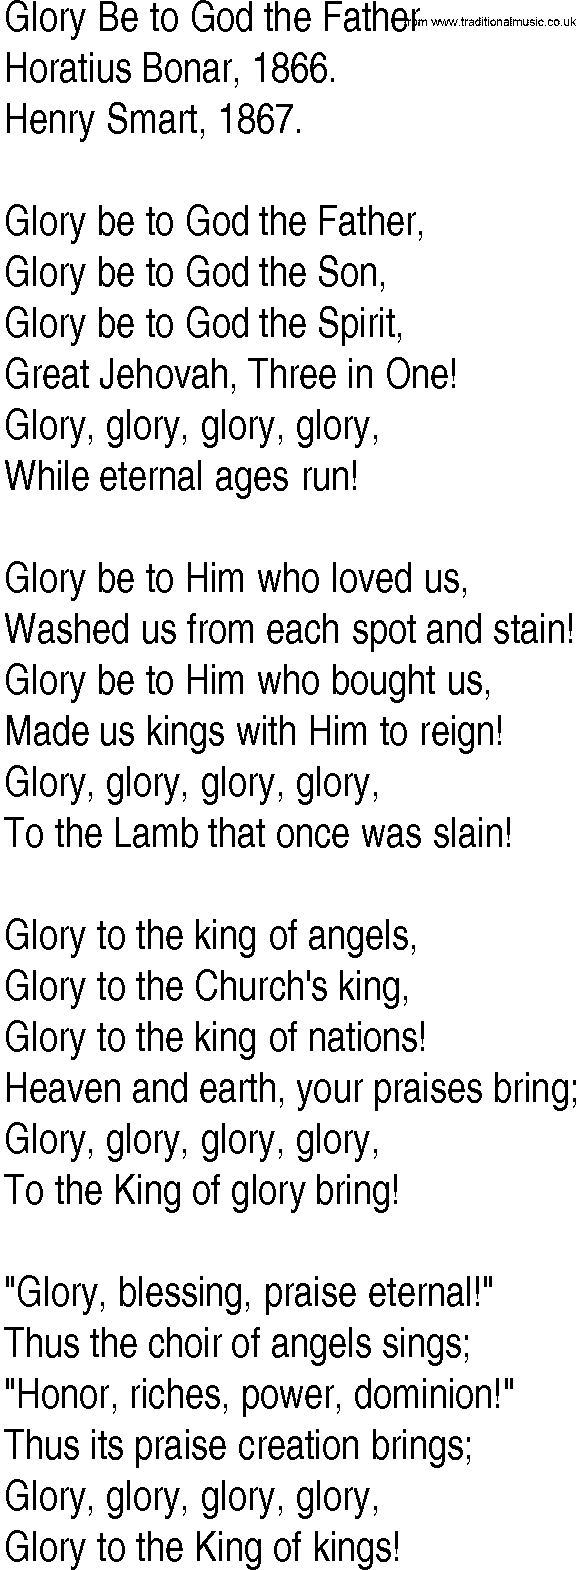 Hymn and Gospel Song: Glory Be to God the Father by Horatius Bonar lyrics